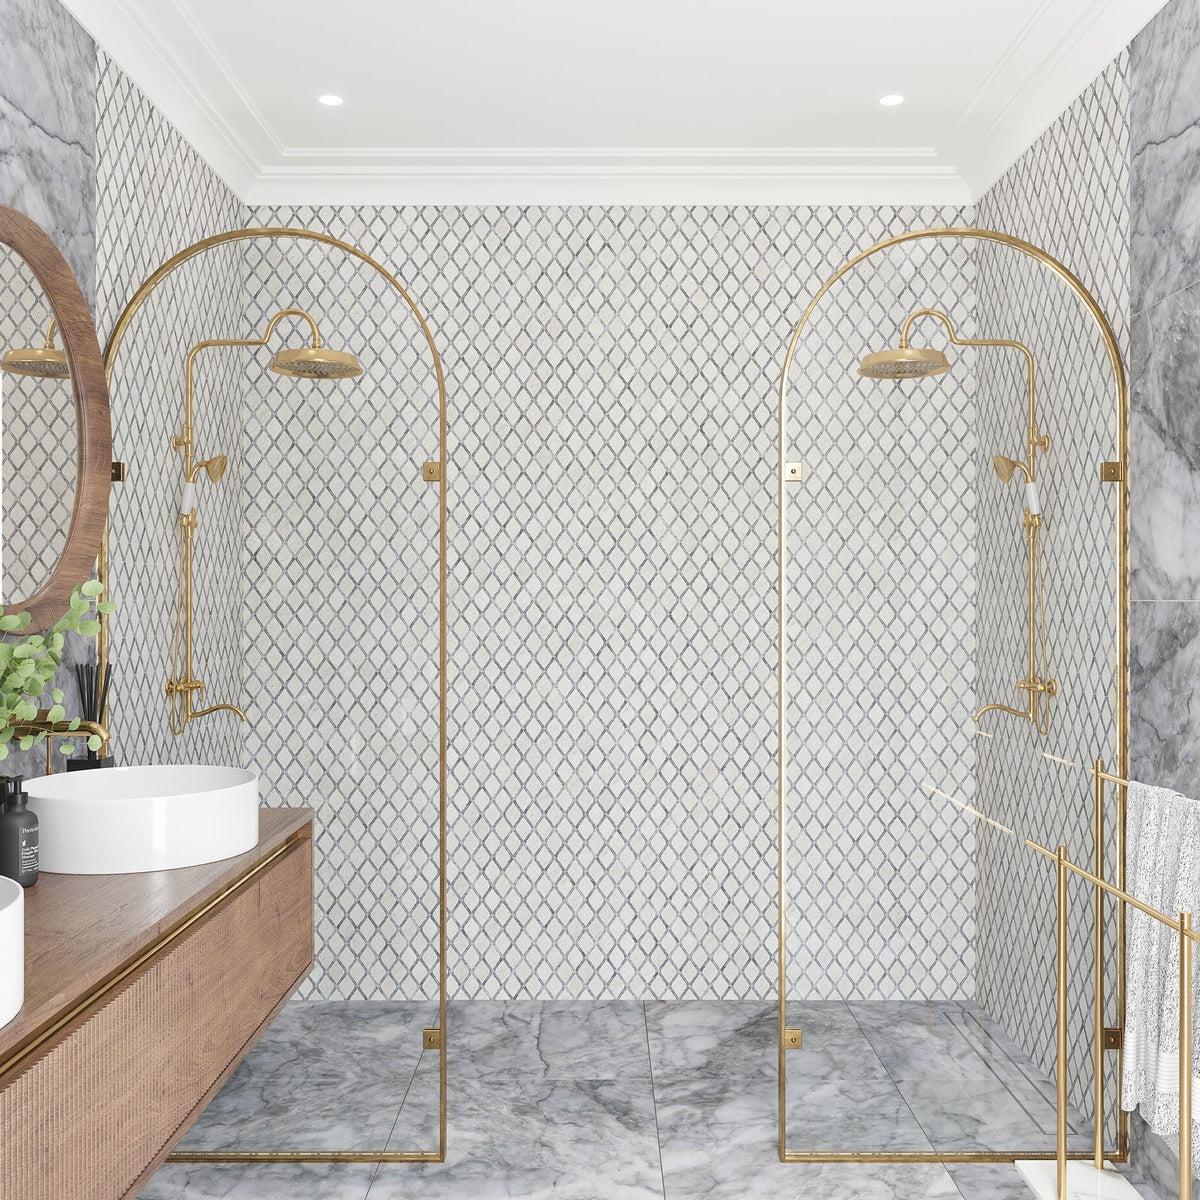 Marble bathroom shower wall with gold fixtures and natural decor